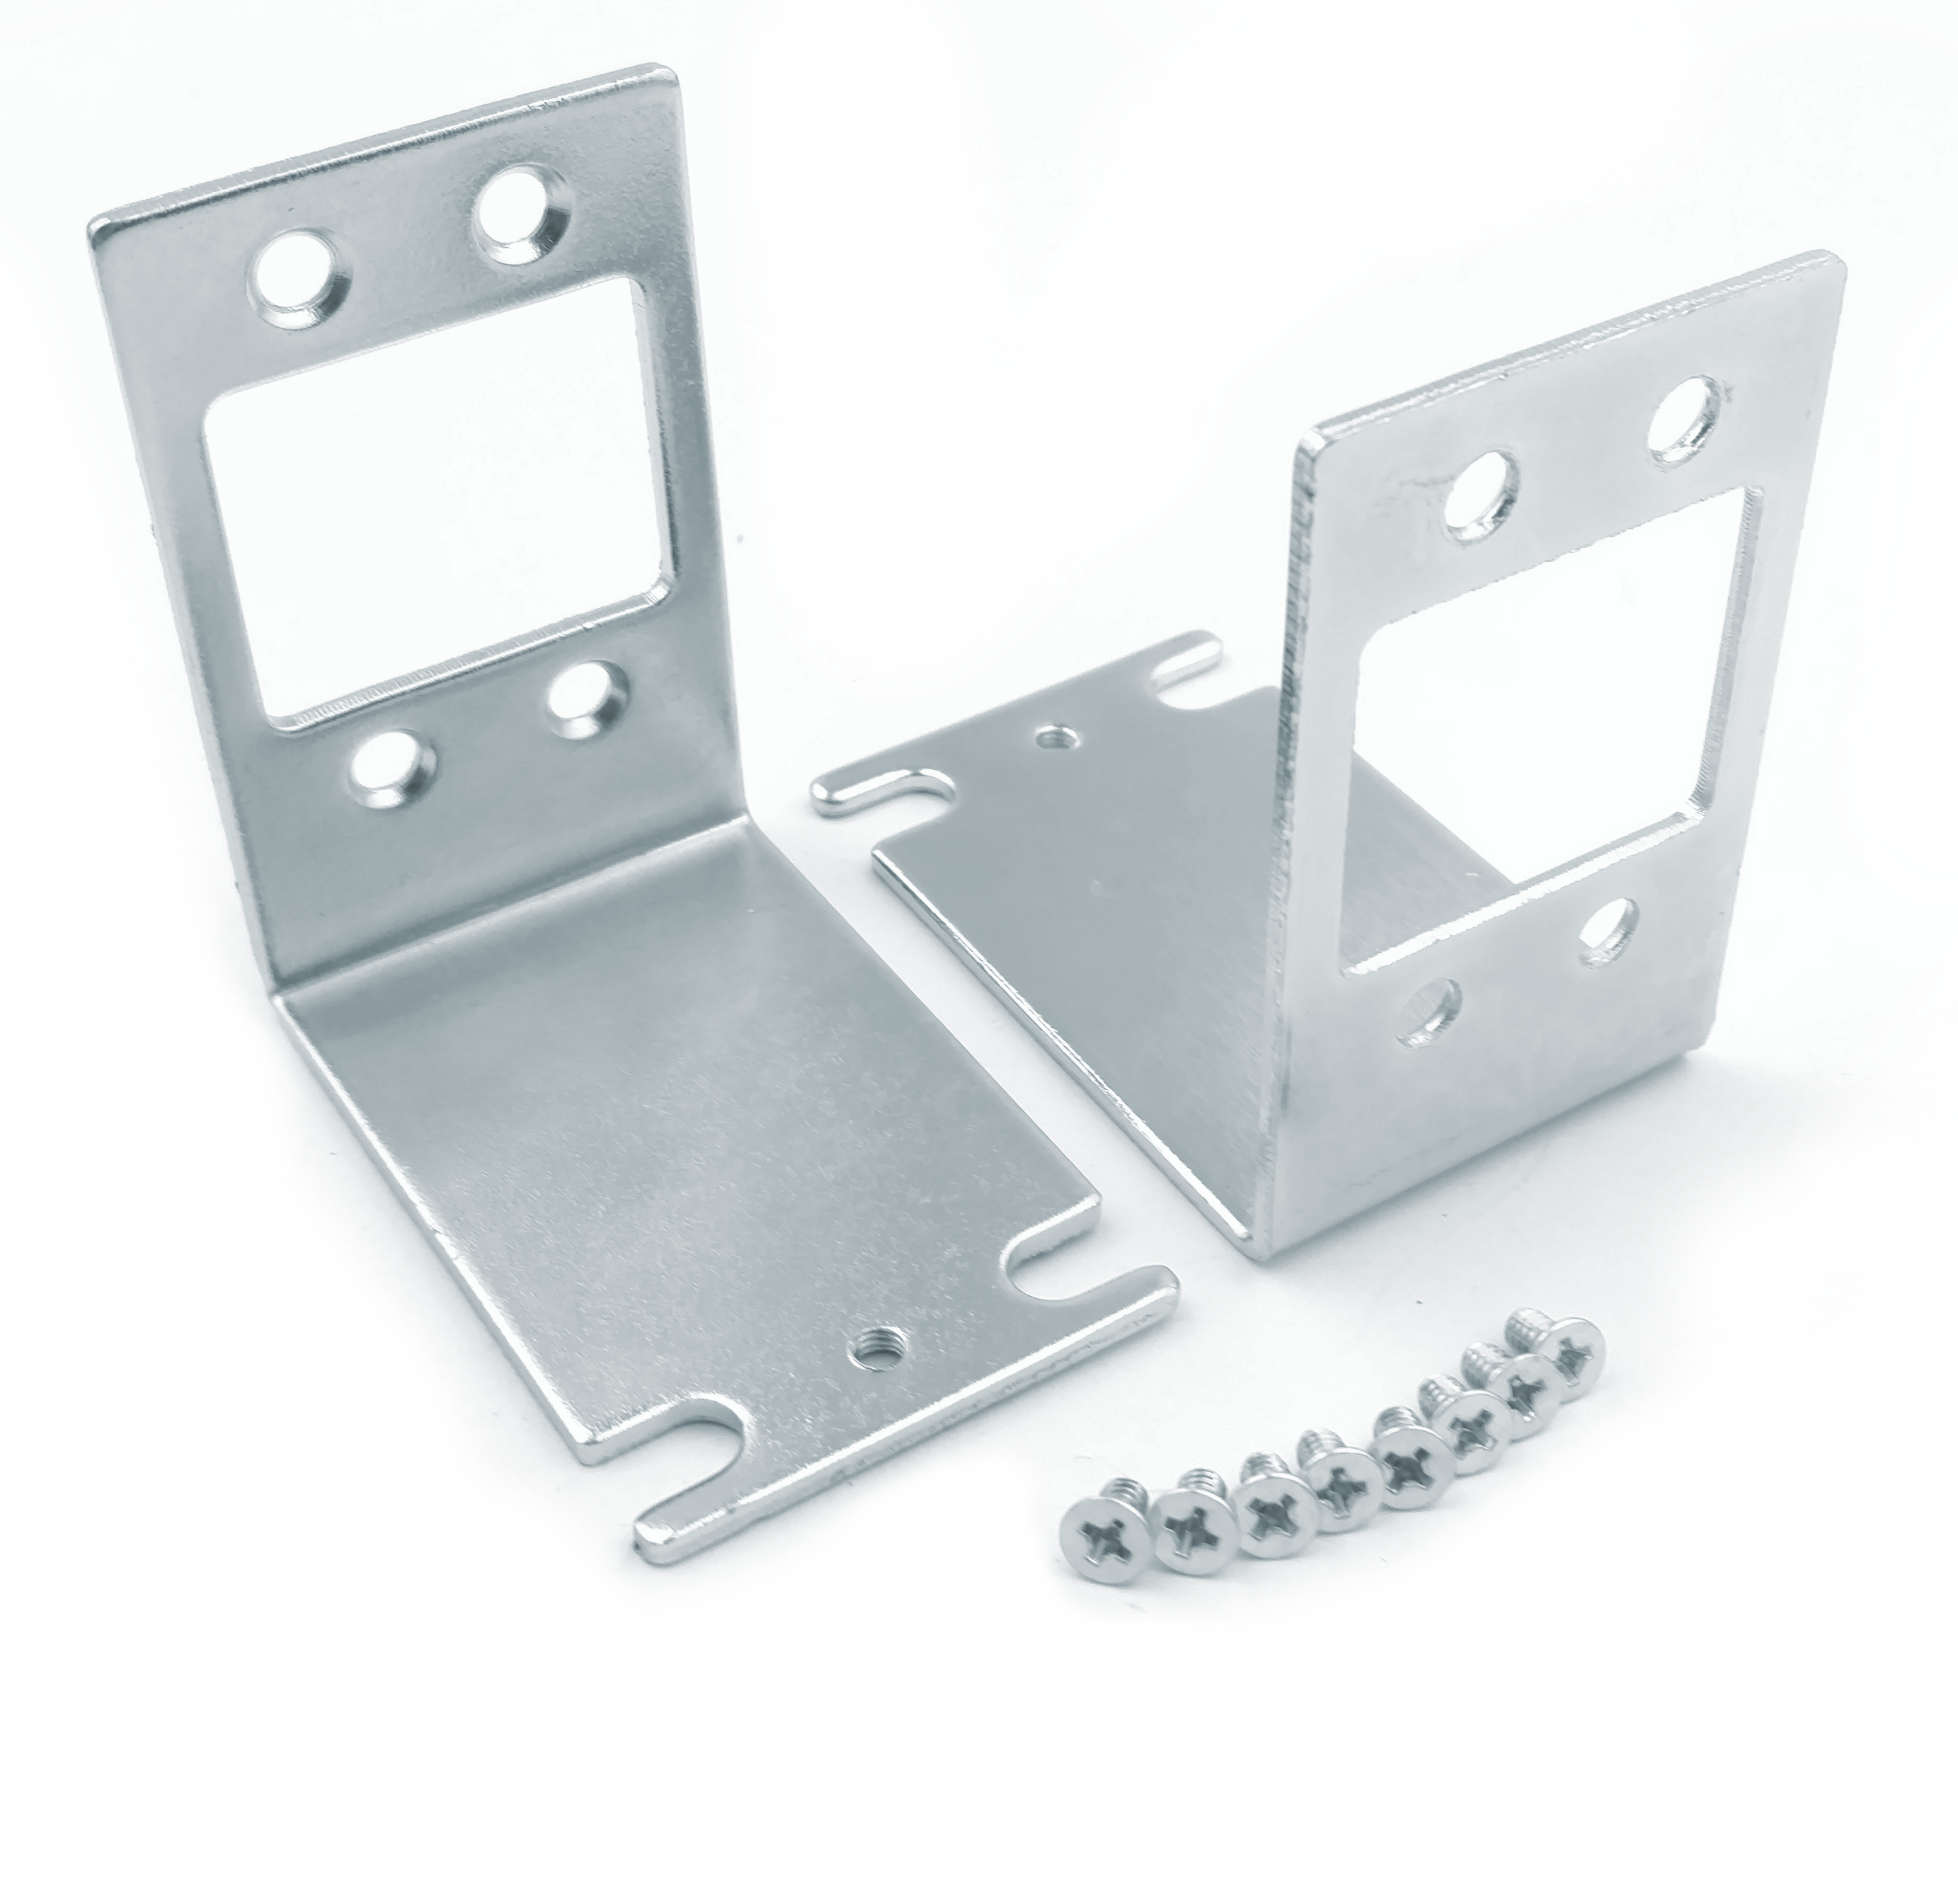 19" Rack Mount Kit for Cisco 1905 1921 - Click Image to Close